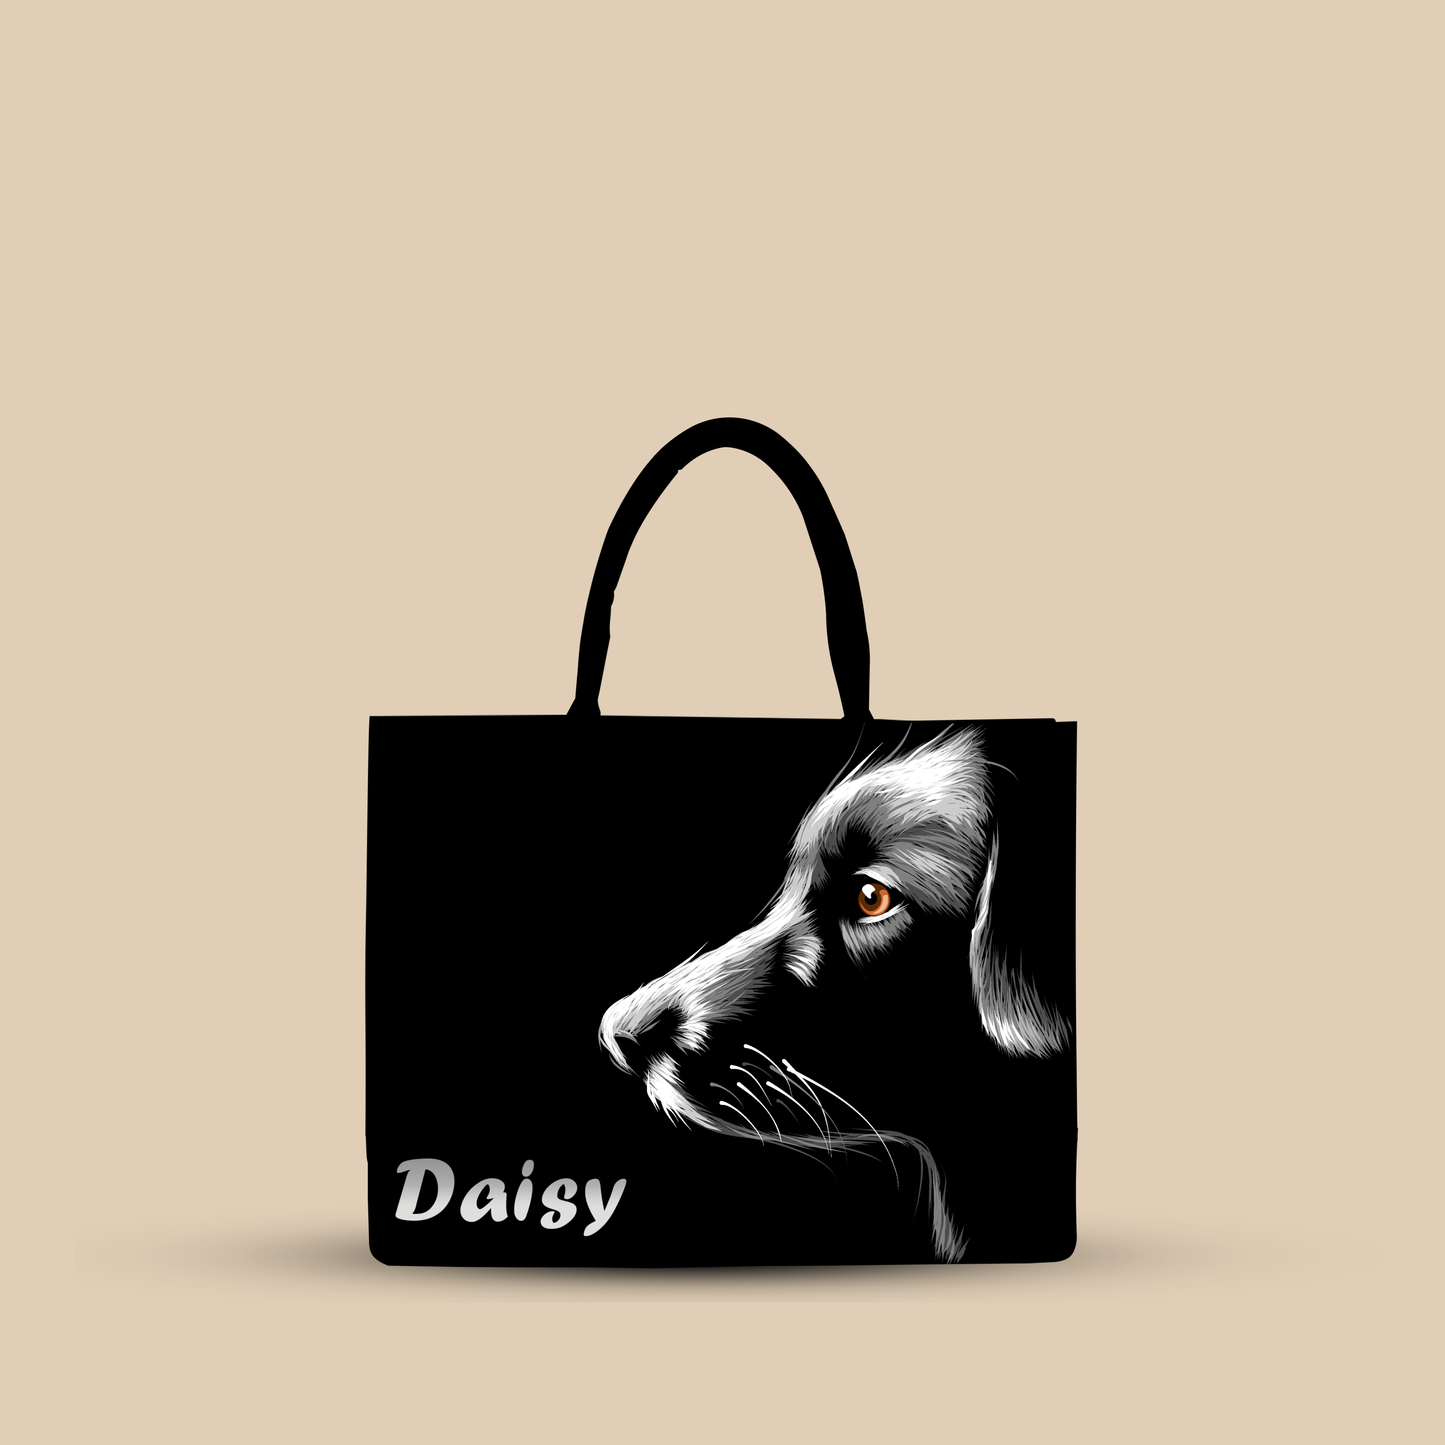 Personalized Tote Bag Designed With Black And White Dog